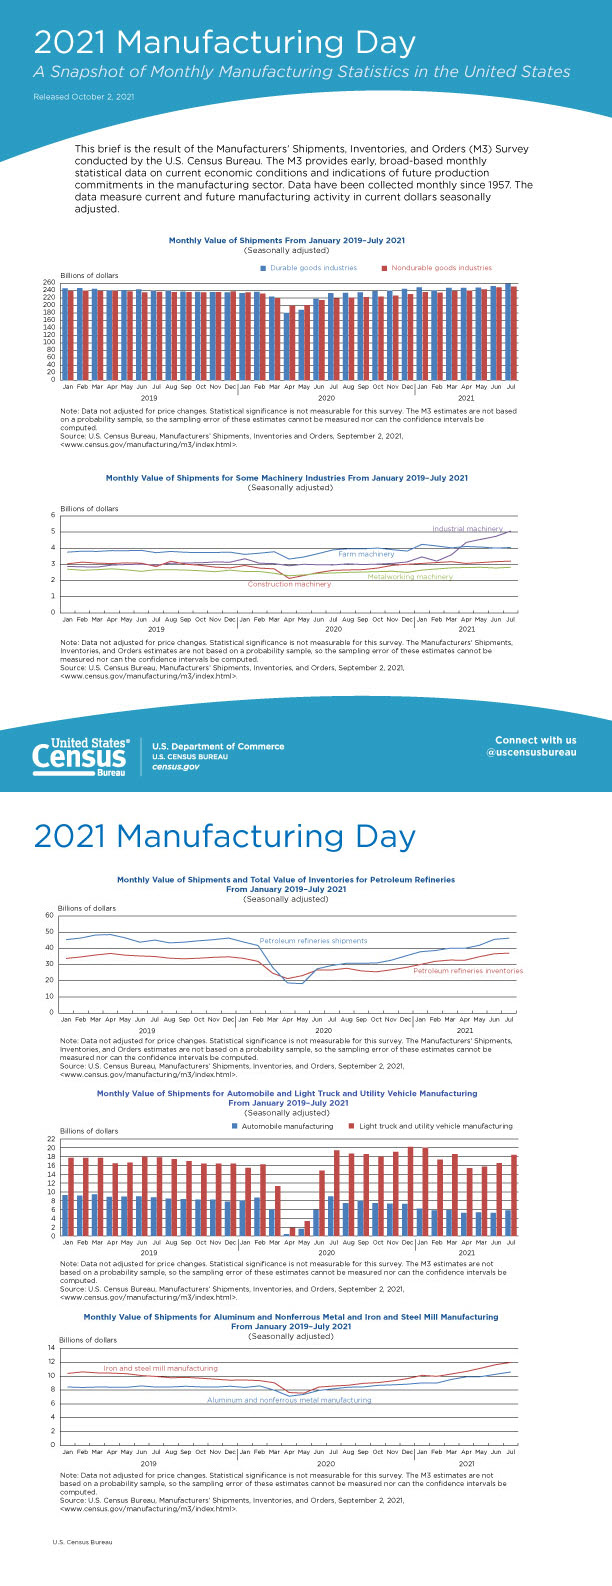 2021 Manufacturing Day, A Snapshot of Monthly Manufacturing Statistics in the United States